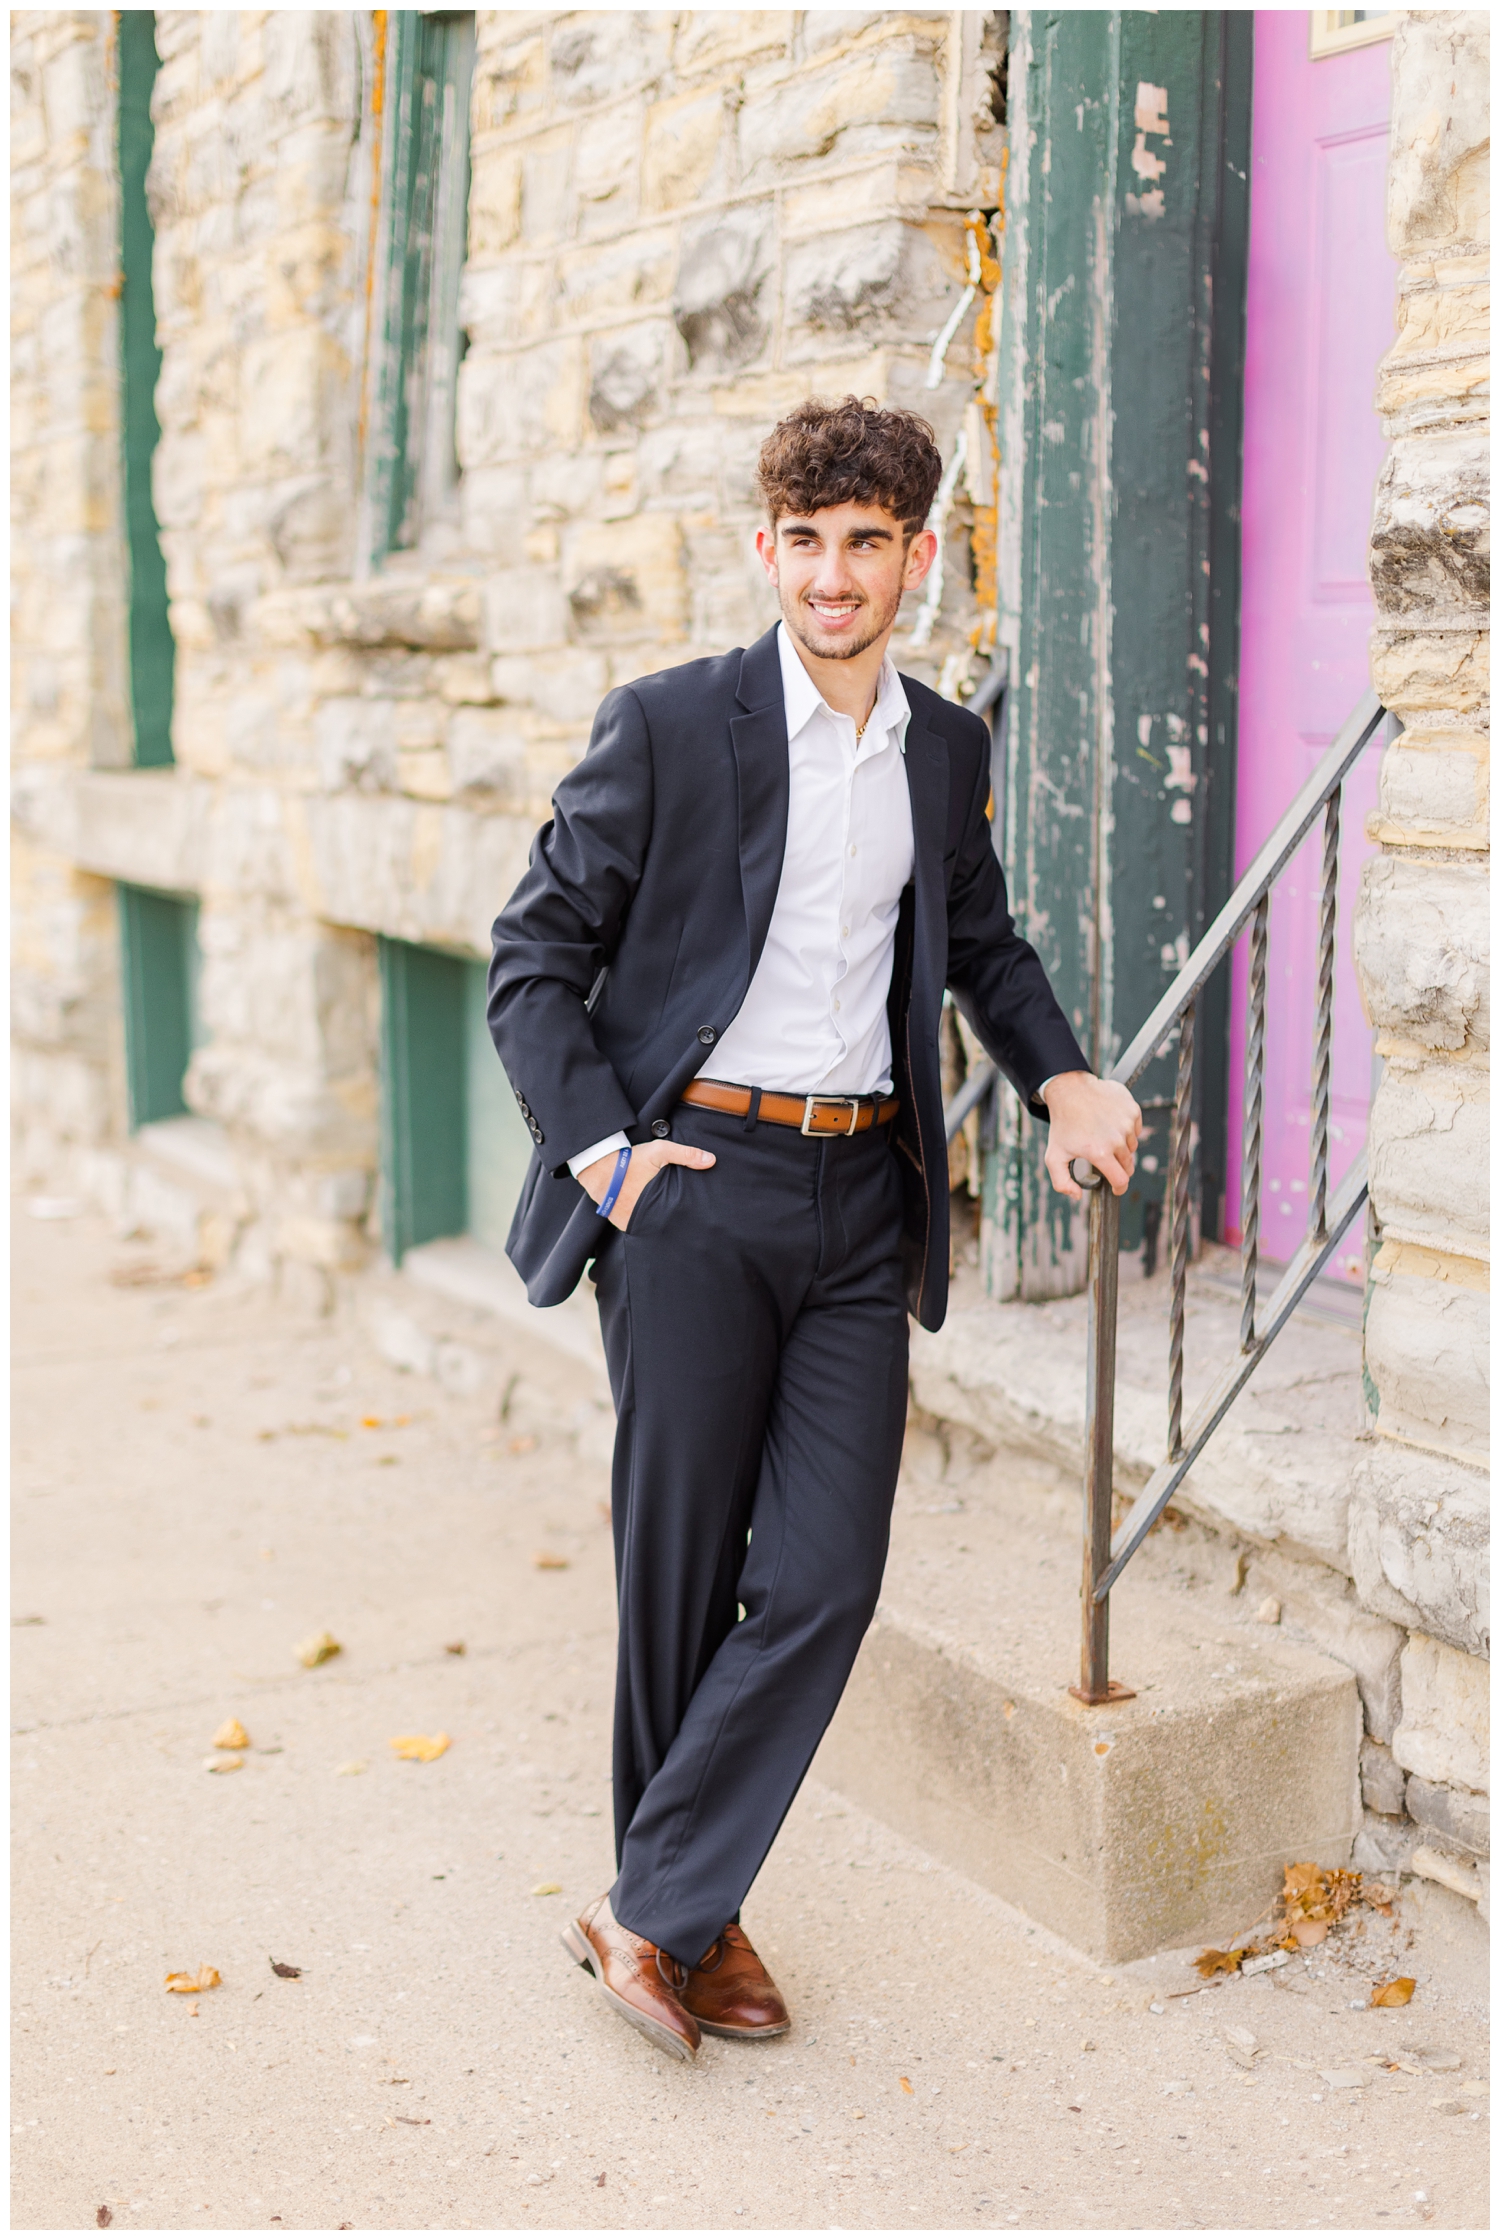 Sam wearing a black suit leans over a stair rail in downtown Humboldt, IA | CB Studio